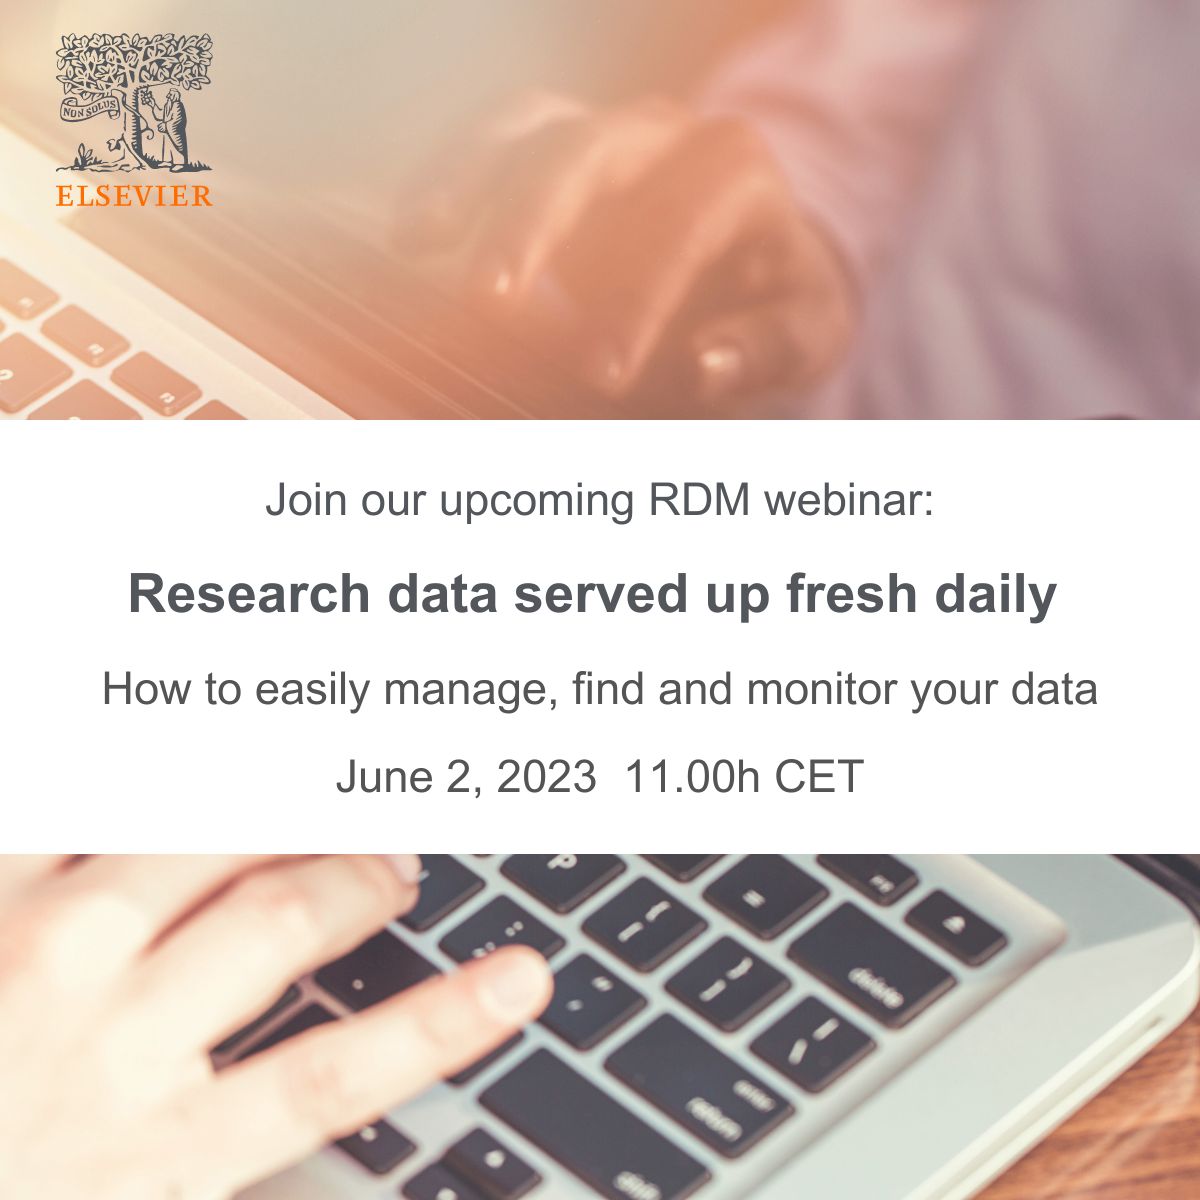 Curious on how to better manage and monitor your data? Join our upcoming webinar session to have this and other questions answered directly by experts.

Register today: spkl.io/601245FmY 

 #DataResearch #ResearchDataManagement #OpenScience